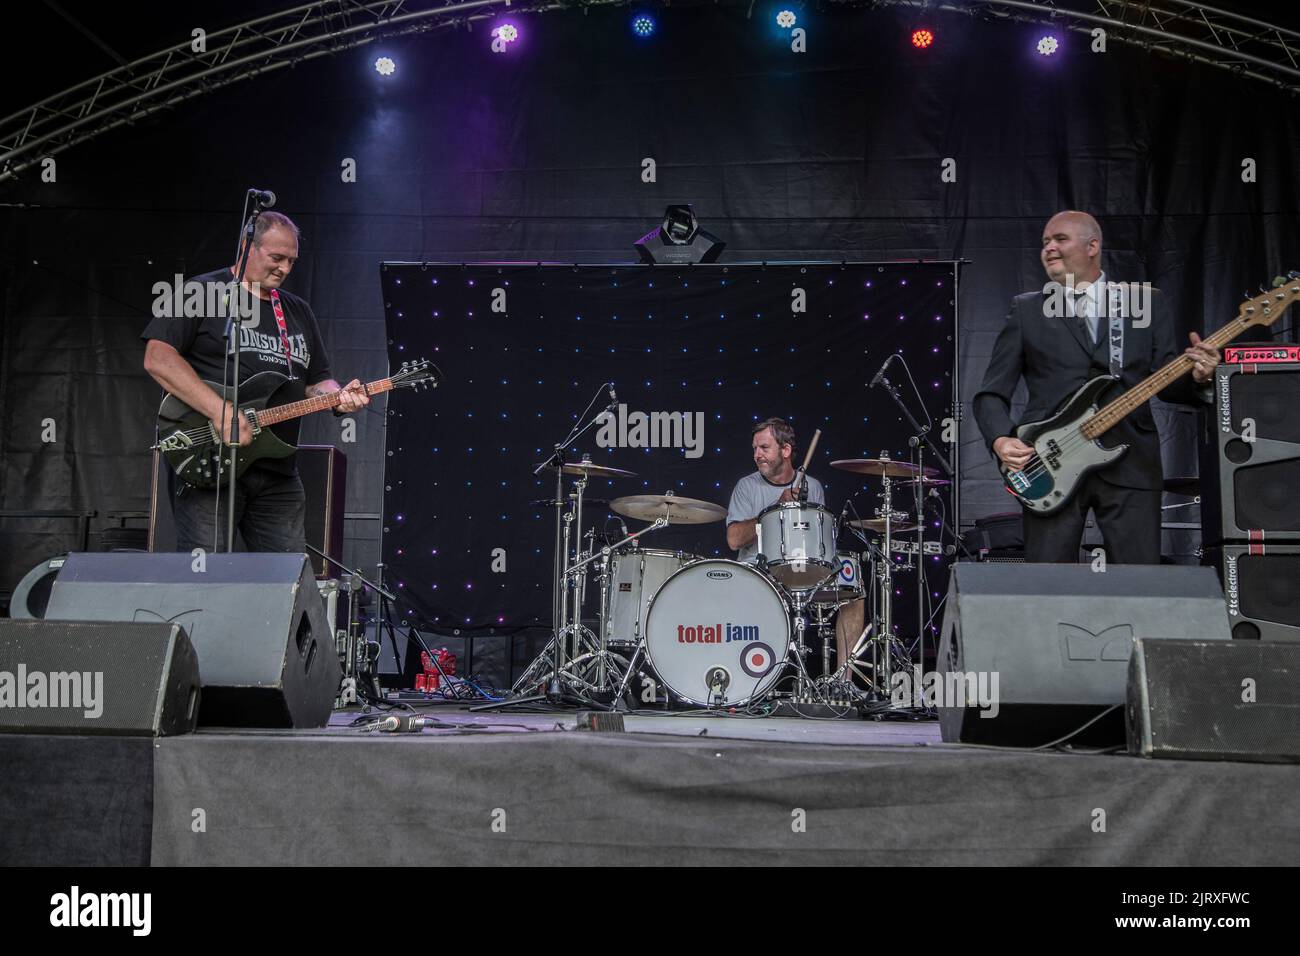 Abington Park, UK. 26th August 2022. Northampton is playing host to several tribute acts for some of the world’s best know artists over the Bank holiday weekend, the event is organised by Showtime Events Group. Credit: Keith J Smith./Alamy Live News. Stock Photo